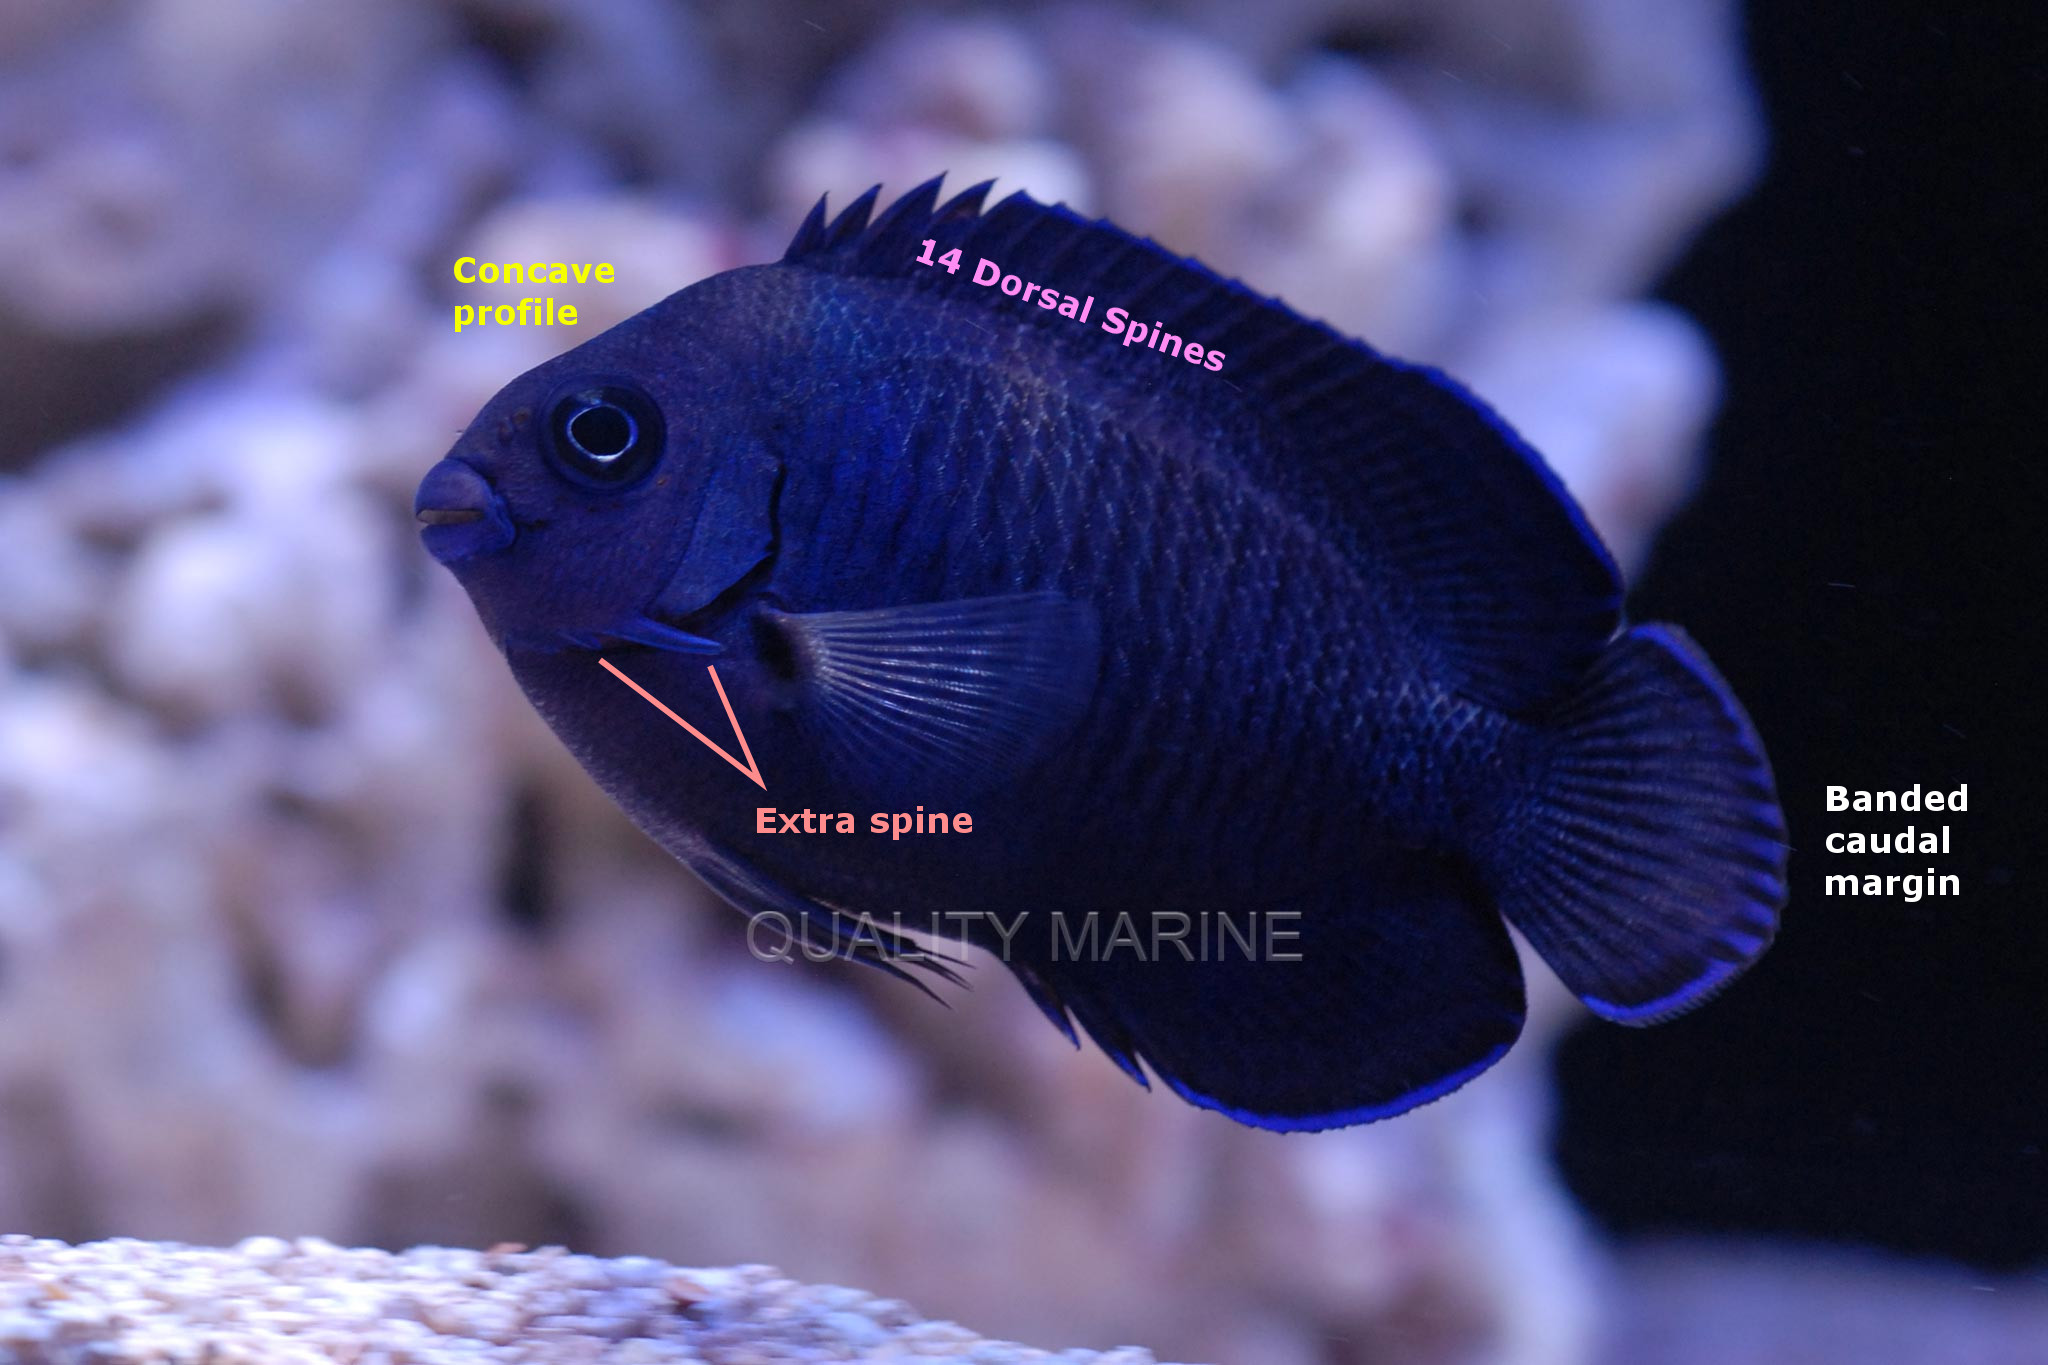 Monday Archives: A Bewilderingly Blue Pygmy Angelfish From Fiji